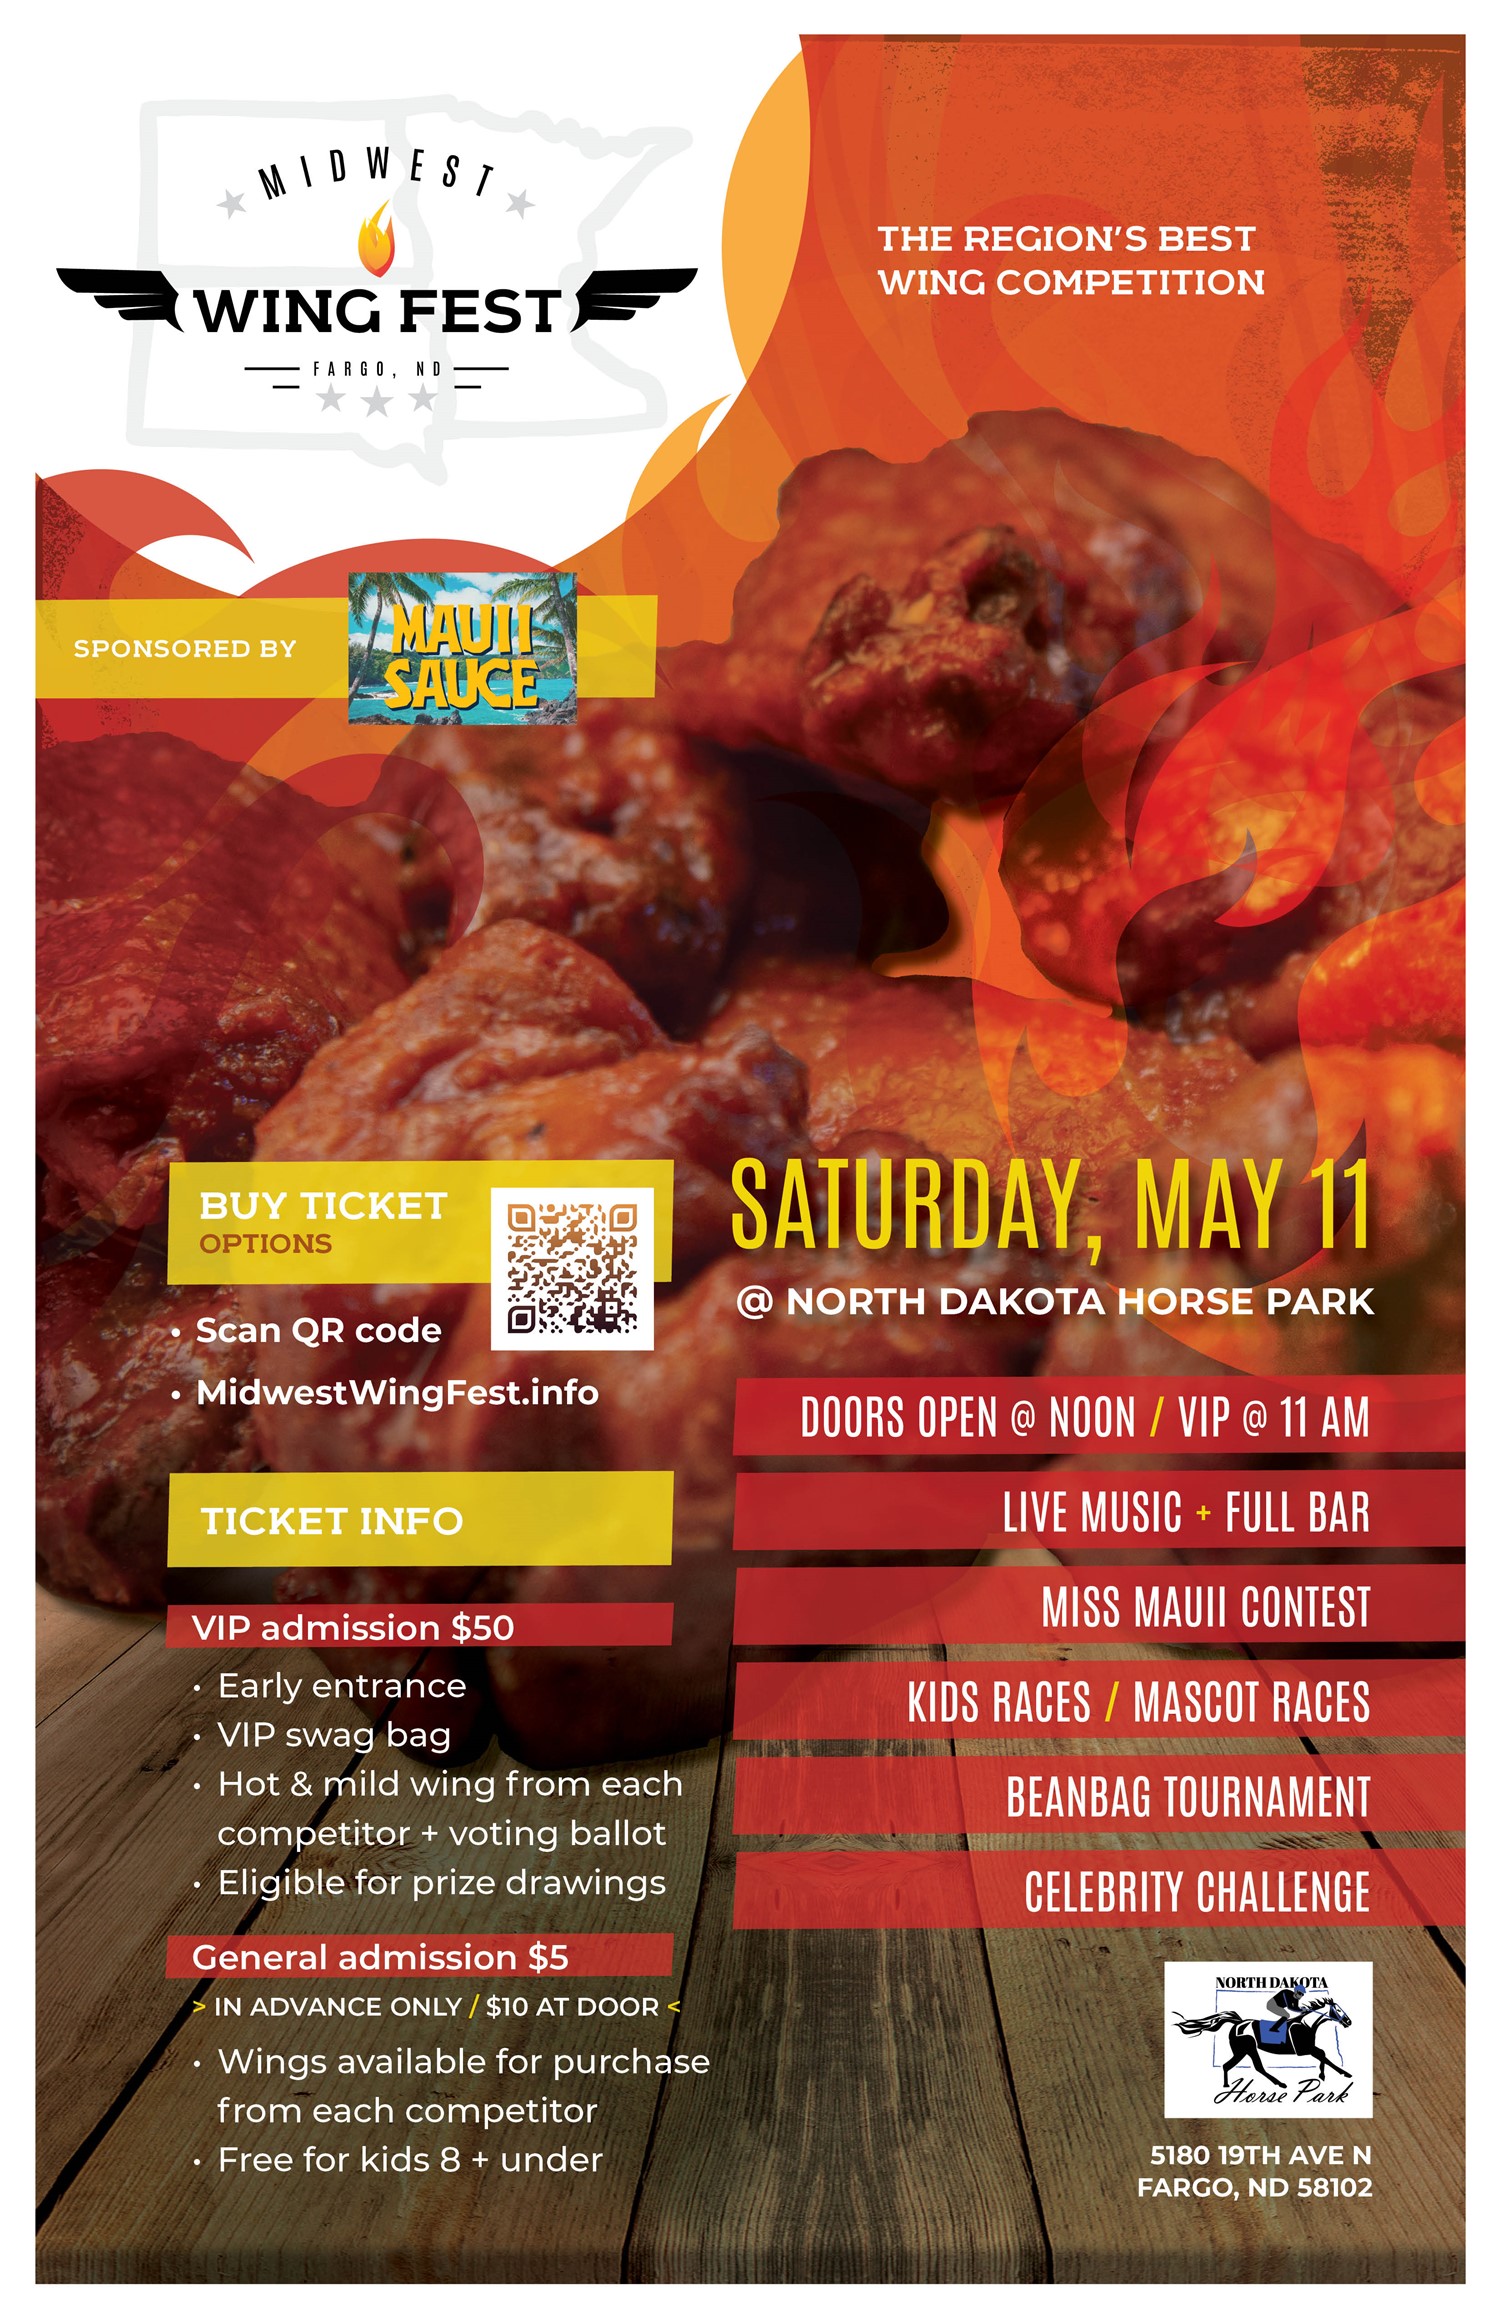 Midwest Wing Fest The region's best wing competition on may. 11, 12:00@North Dakota Horse Park - Compra entradas y obtén información enSidestreet Live / Four and Four 